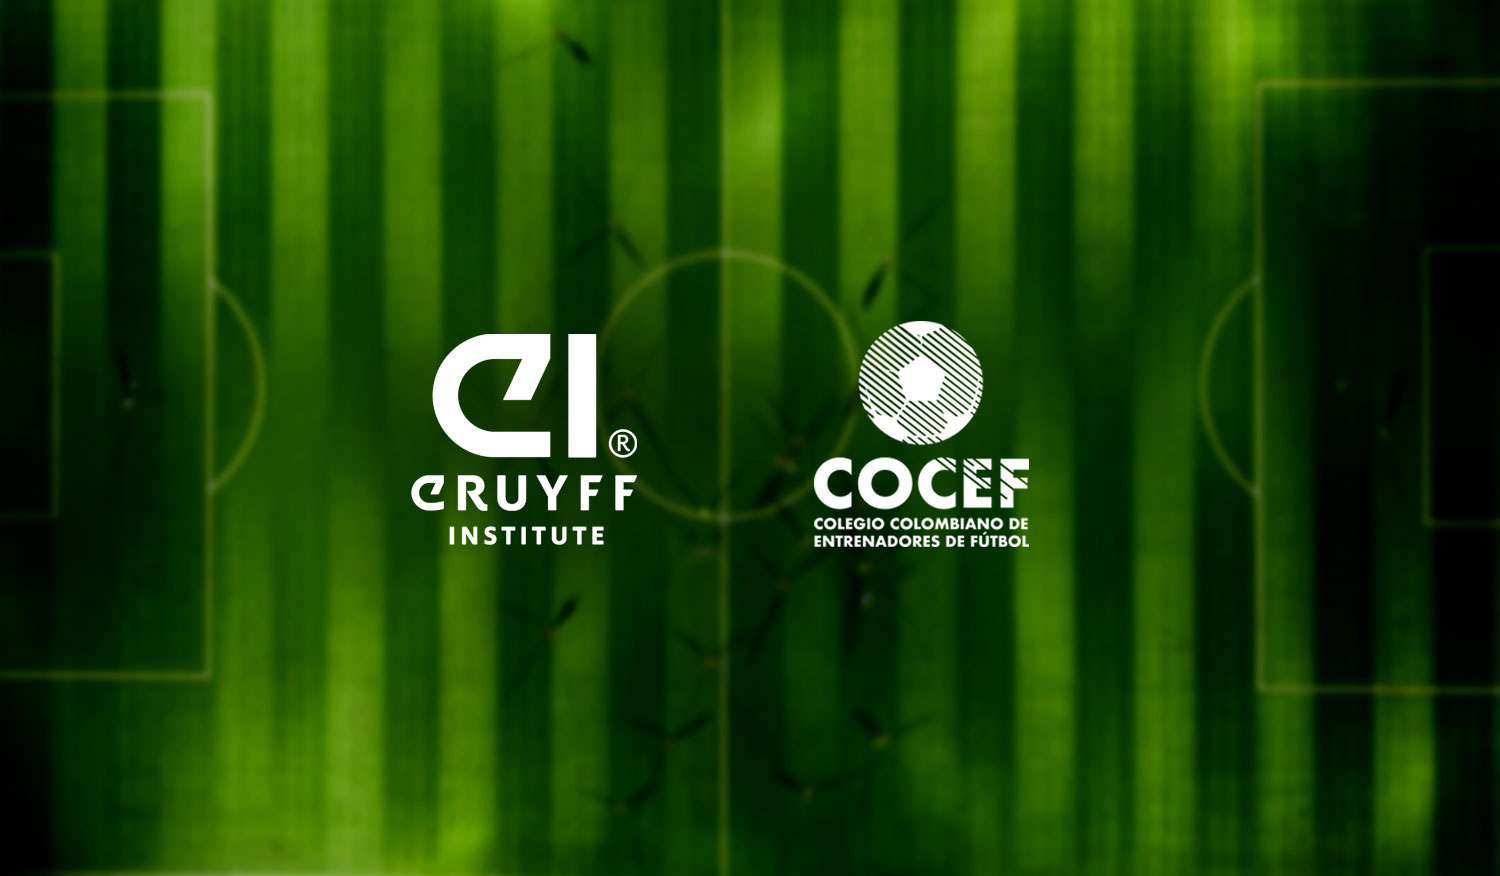 The COCEF promotes academic training together with Johan Cruyff Institute